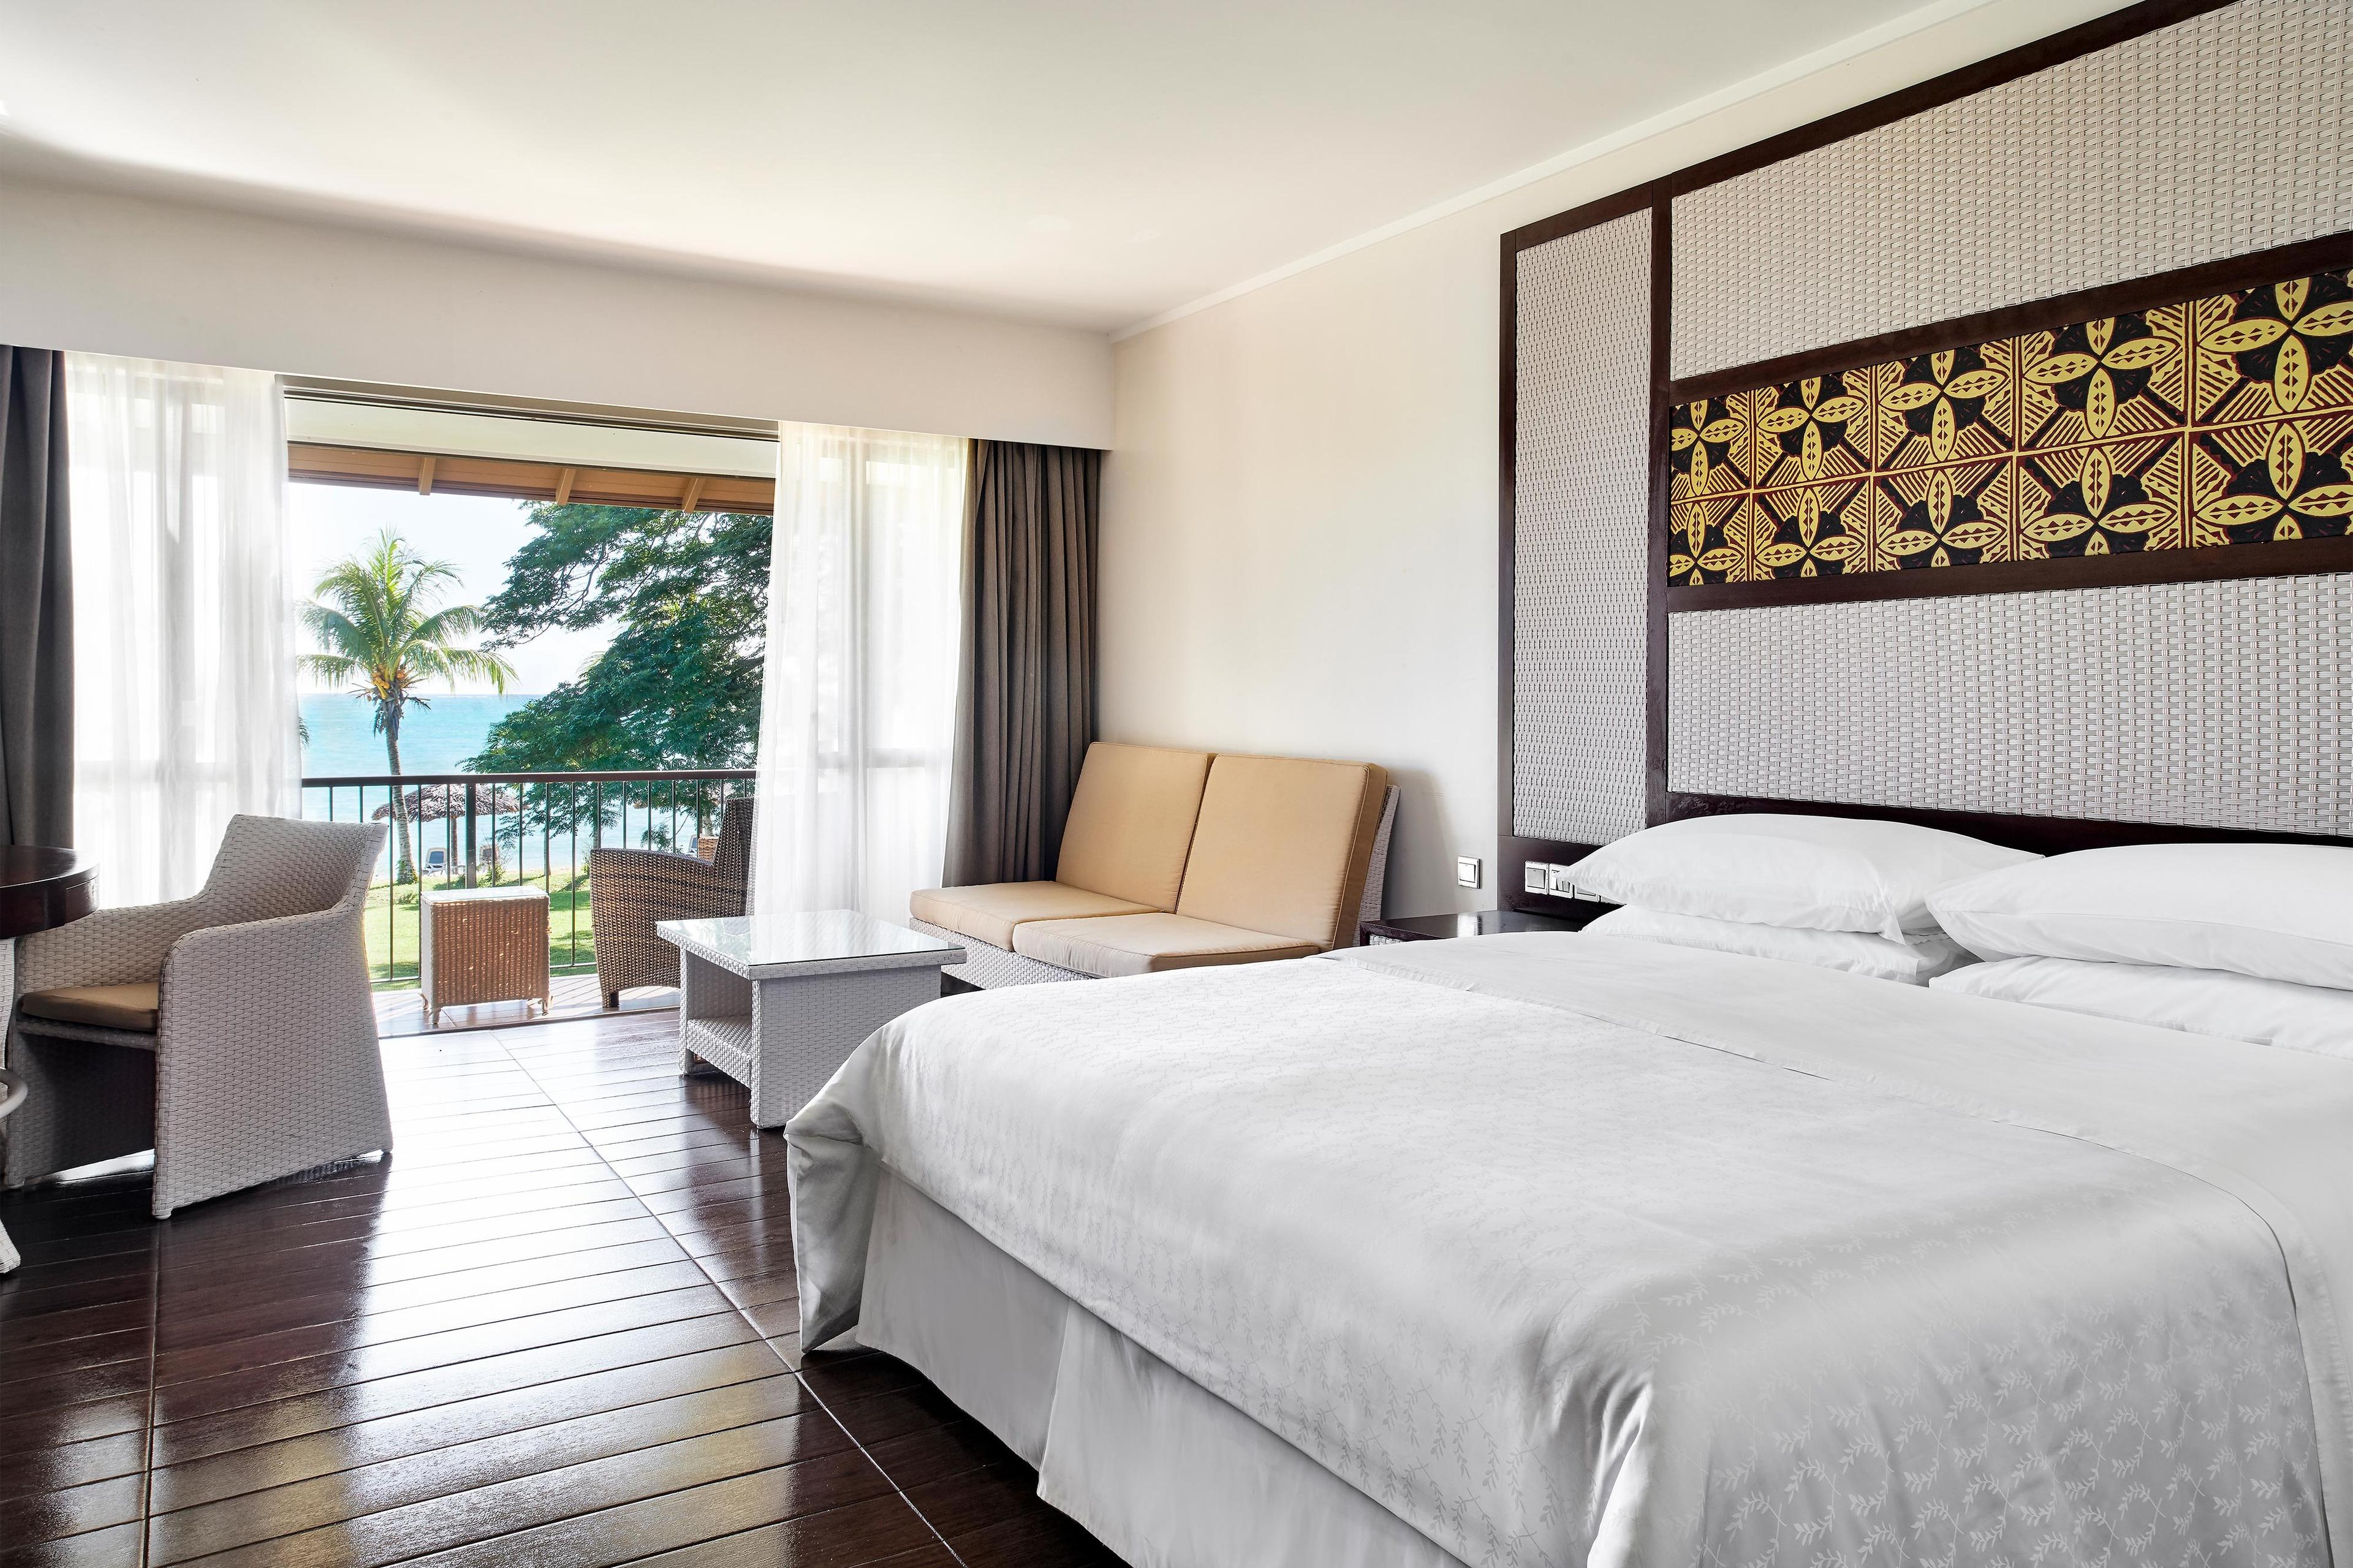 Equipped with the comfortable Sheraton Signature Sleep ExperienceÂ®, our spacious Deluxe Ocean View King room provides elegant and comfortable accommodation for truly relaxing stay.